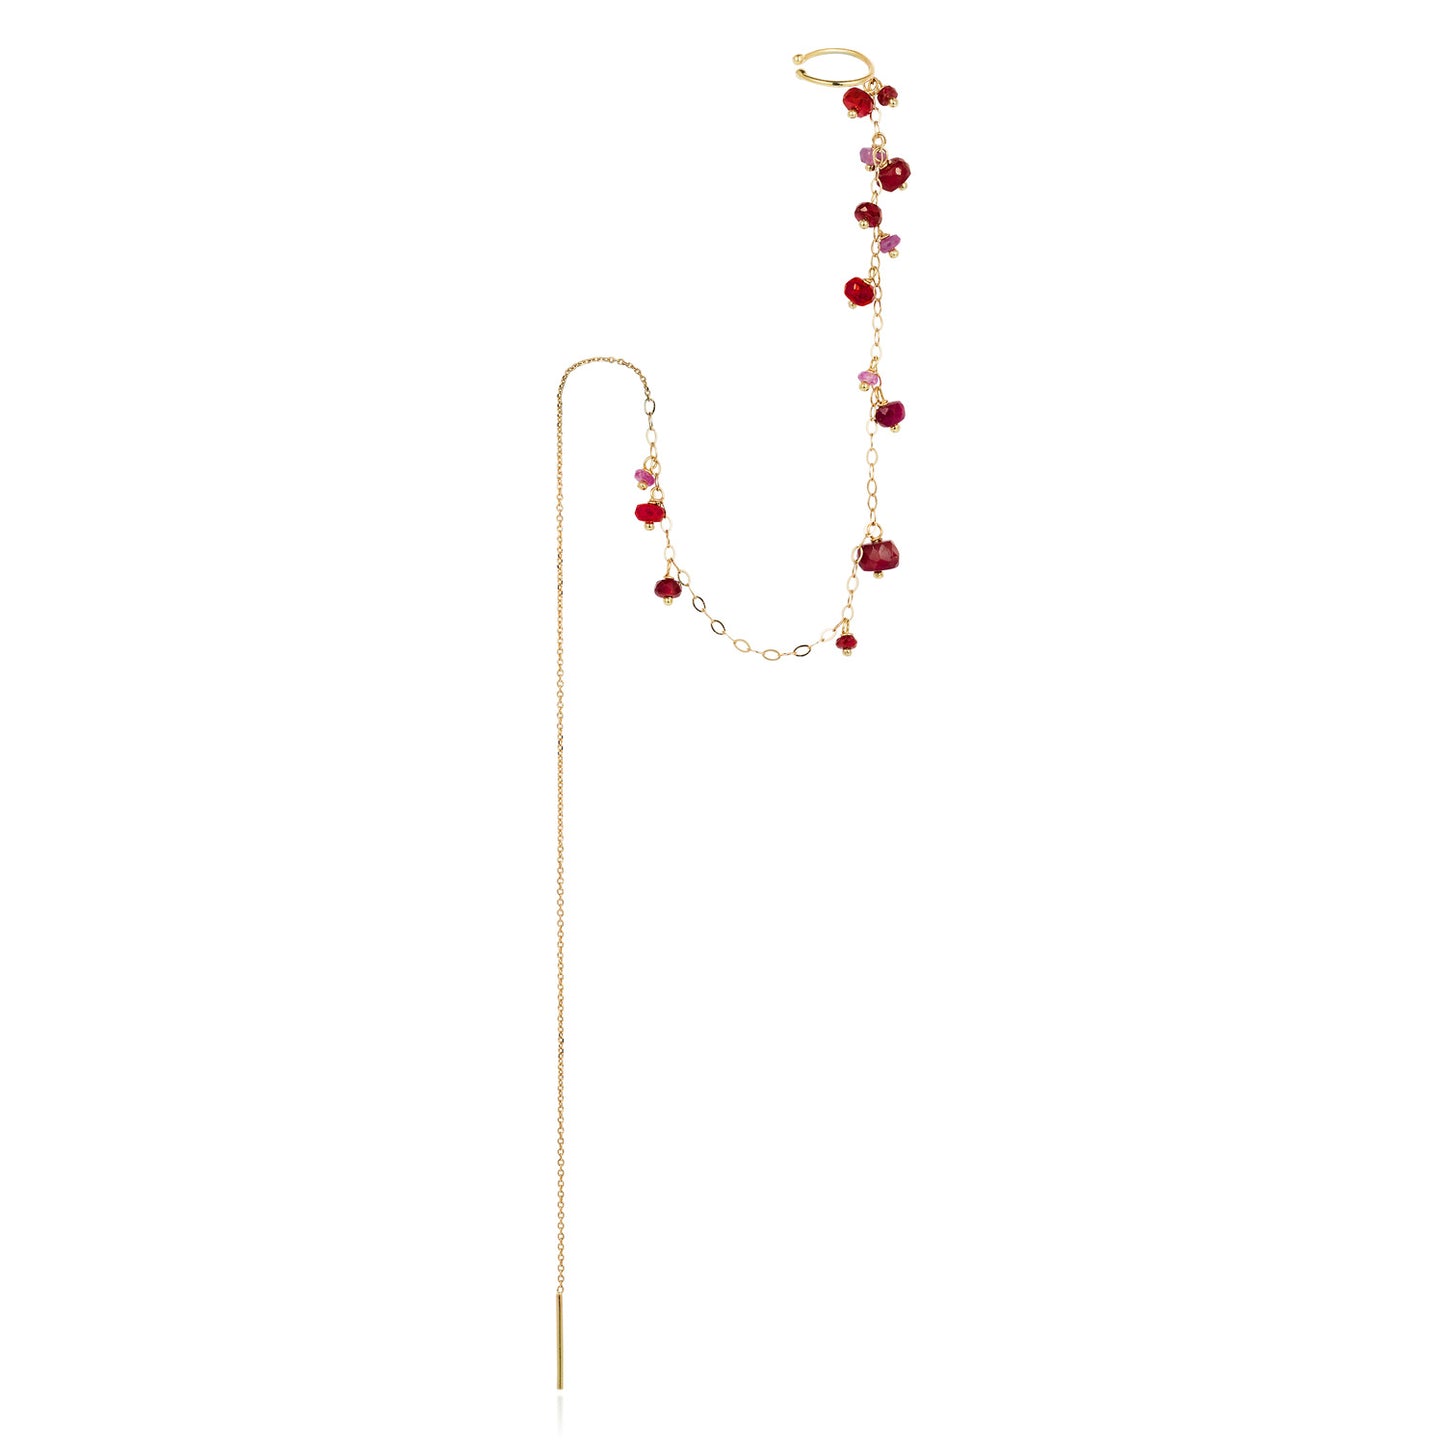 18 ct yellow gold thread though earring with chain to ear cuff and Ruby beads